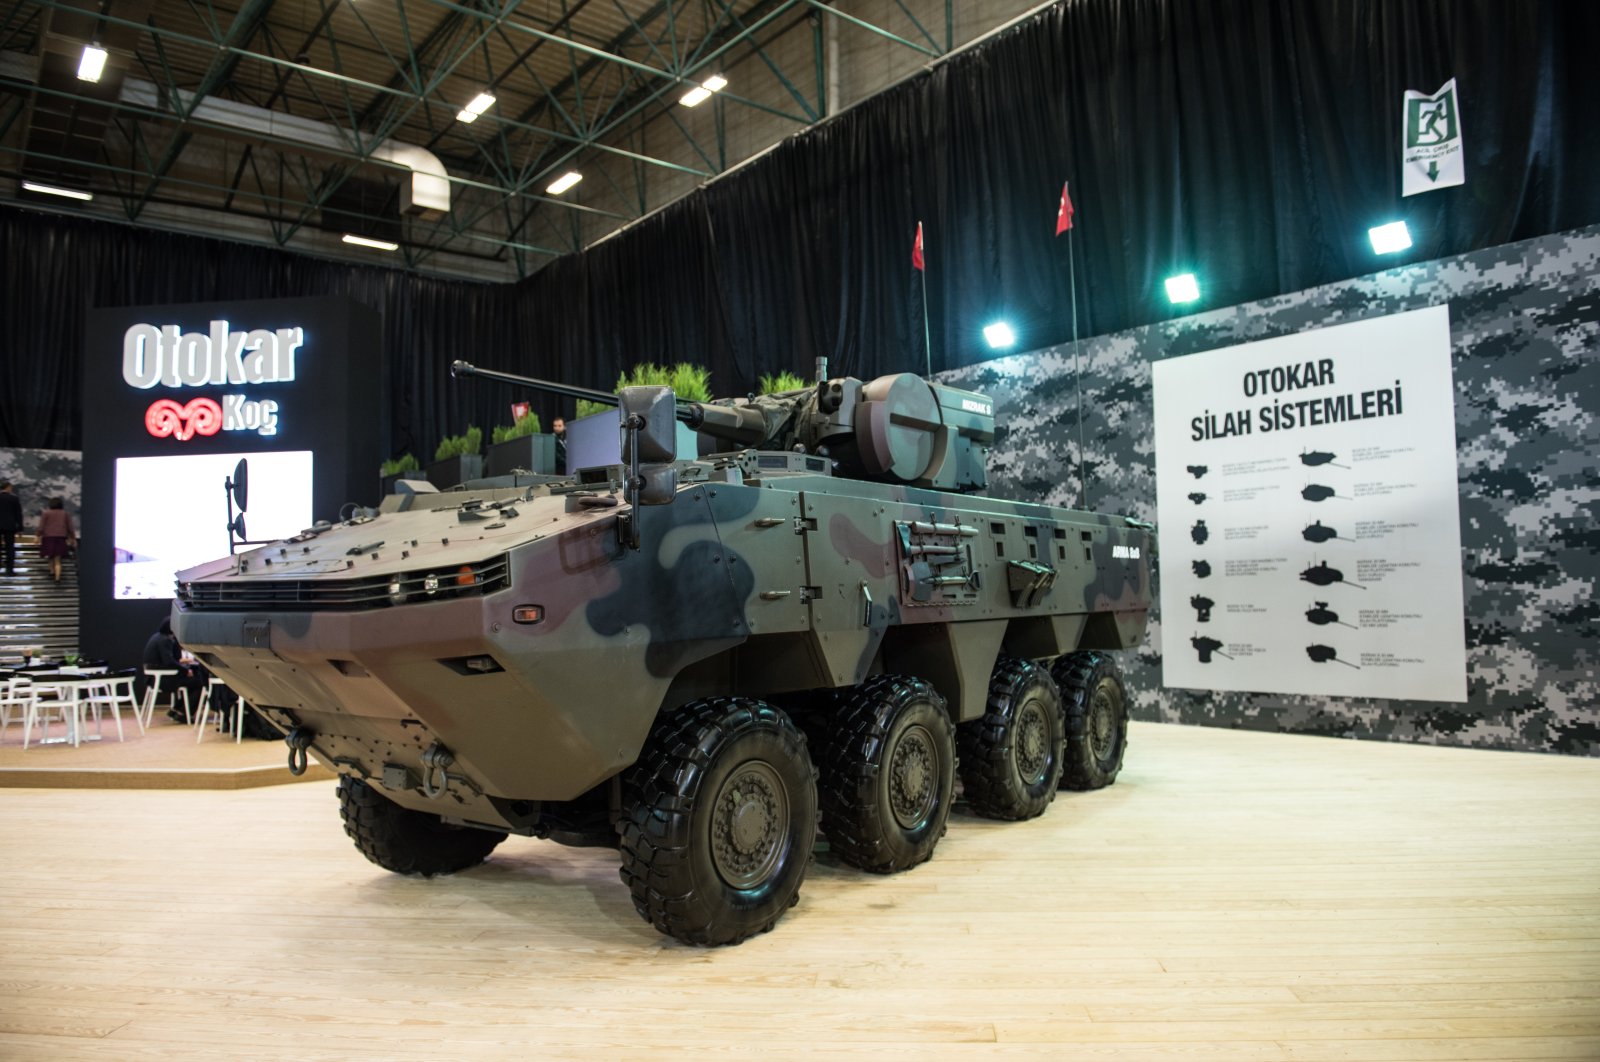 An Arma armored combat vehicle on display at the 13th International Defense Industry Fair (IDEF'17) held in Istanbul between May 9-12, 2017. (Sabah File Photo)'17) held in Istanbul between May 9-12, 2017. (Sabah File Photo)